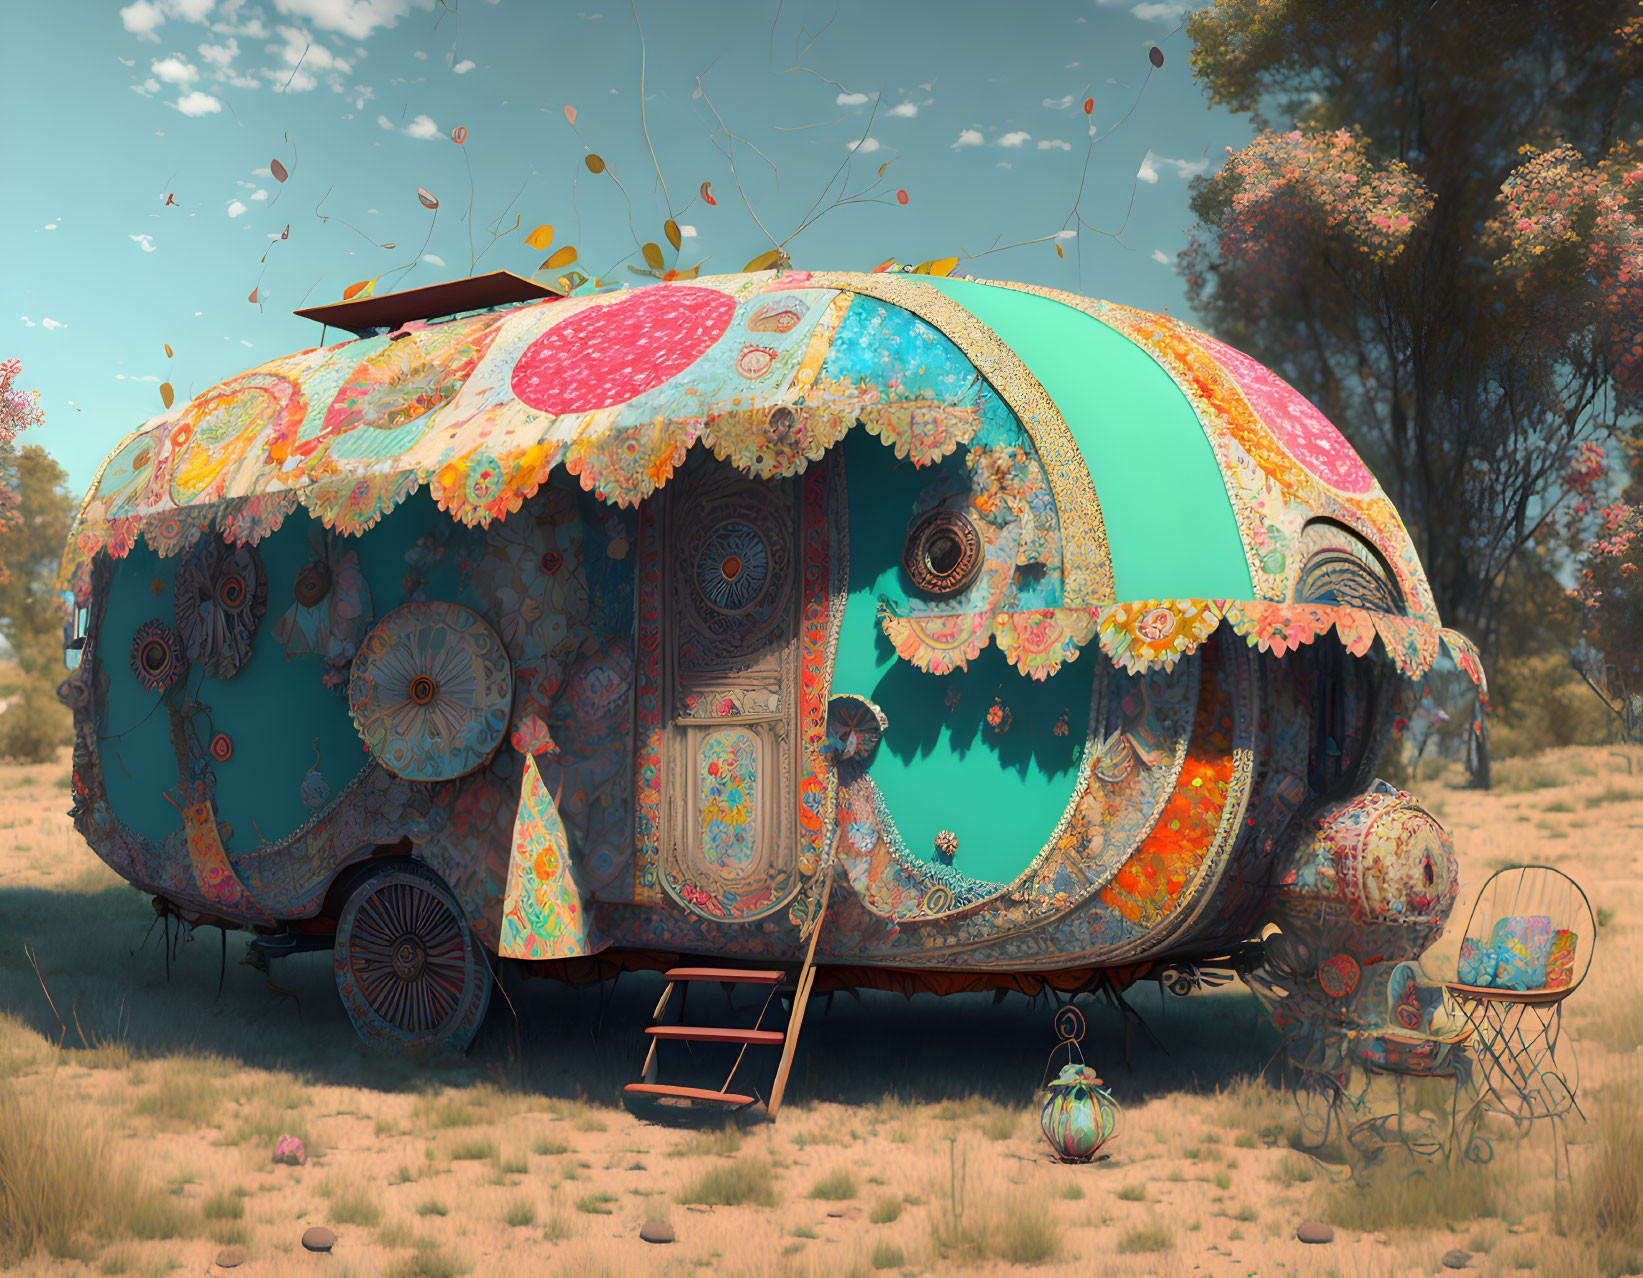 Colorful caravan with intricate patterns in sunny field